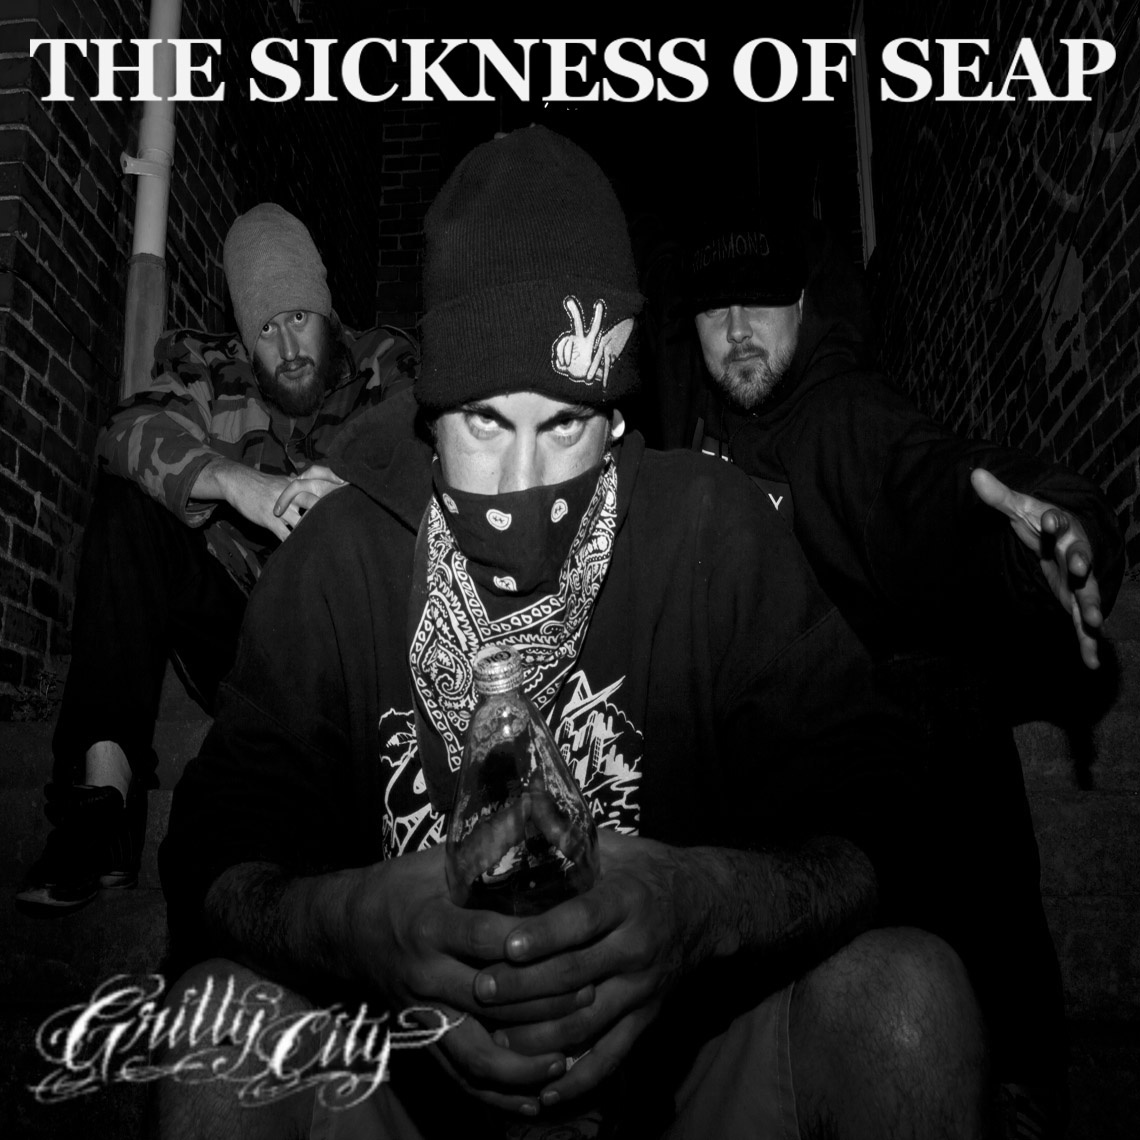 CLICK HERE TO LISTEN TO THE SICKNESS OF SEAP BY GRITTY CITY RECORDS